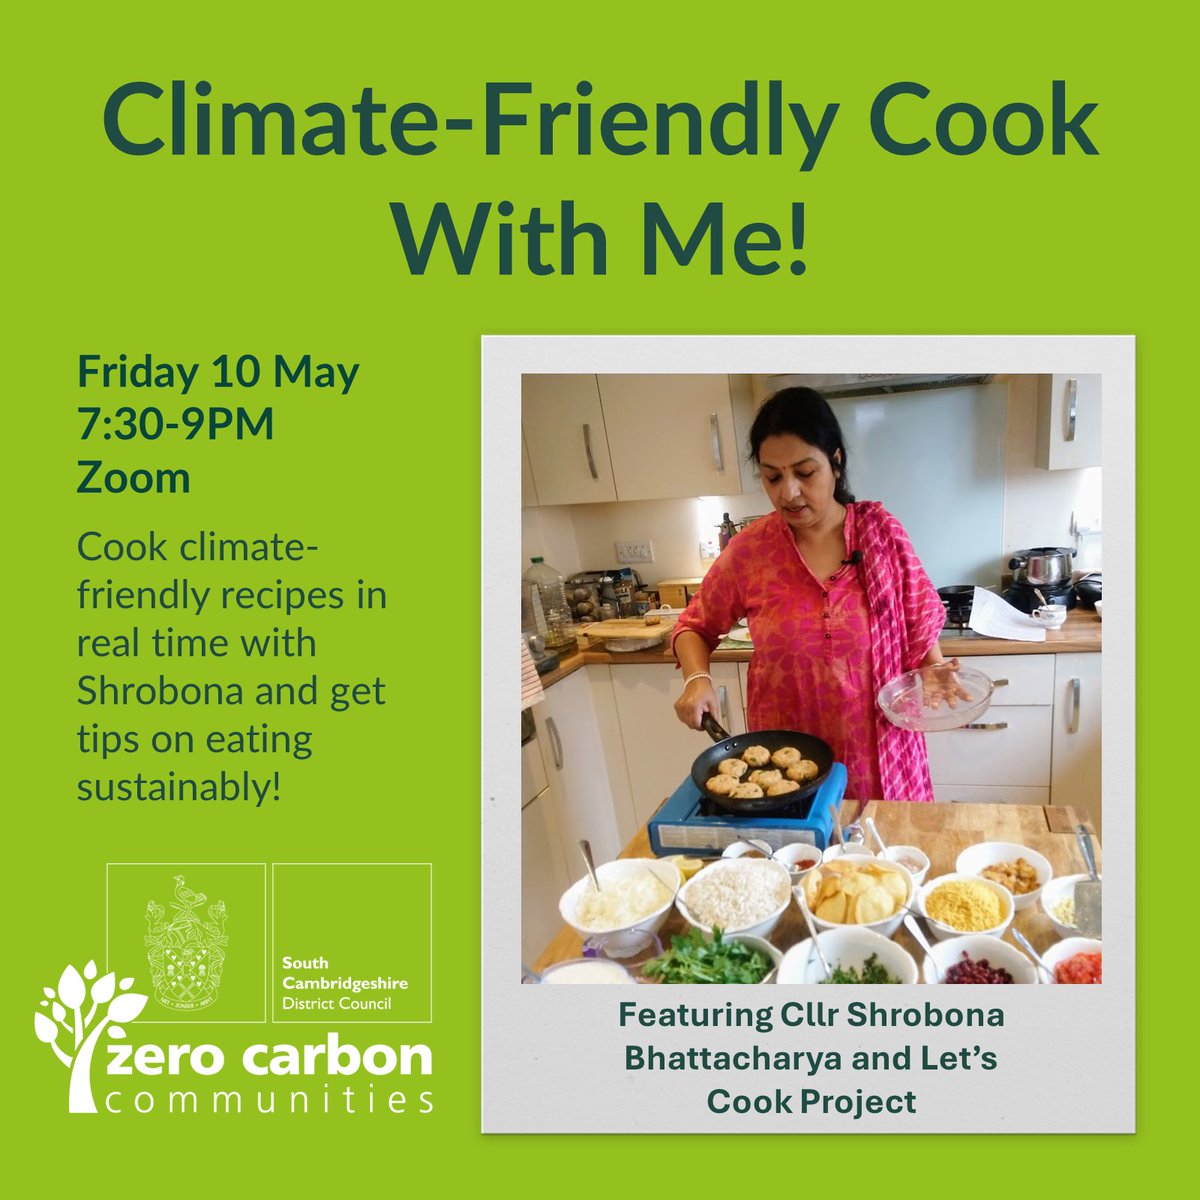 👩‍🍳 We can't wait to host our first Climate-Friendly Cook With Me! An online interactive food event co-hosted with Shrobona Bhattacharya, Friday 10 May 7:30-9:00PM 🥦 Cook along with Shrobona's demonstration! We'll be learning how to assemble a traditional Indian thali (a plate…